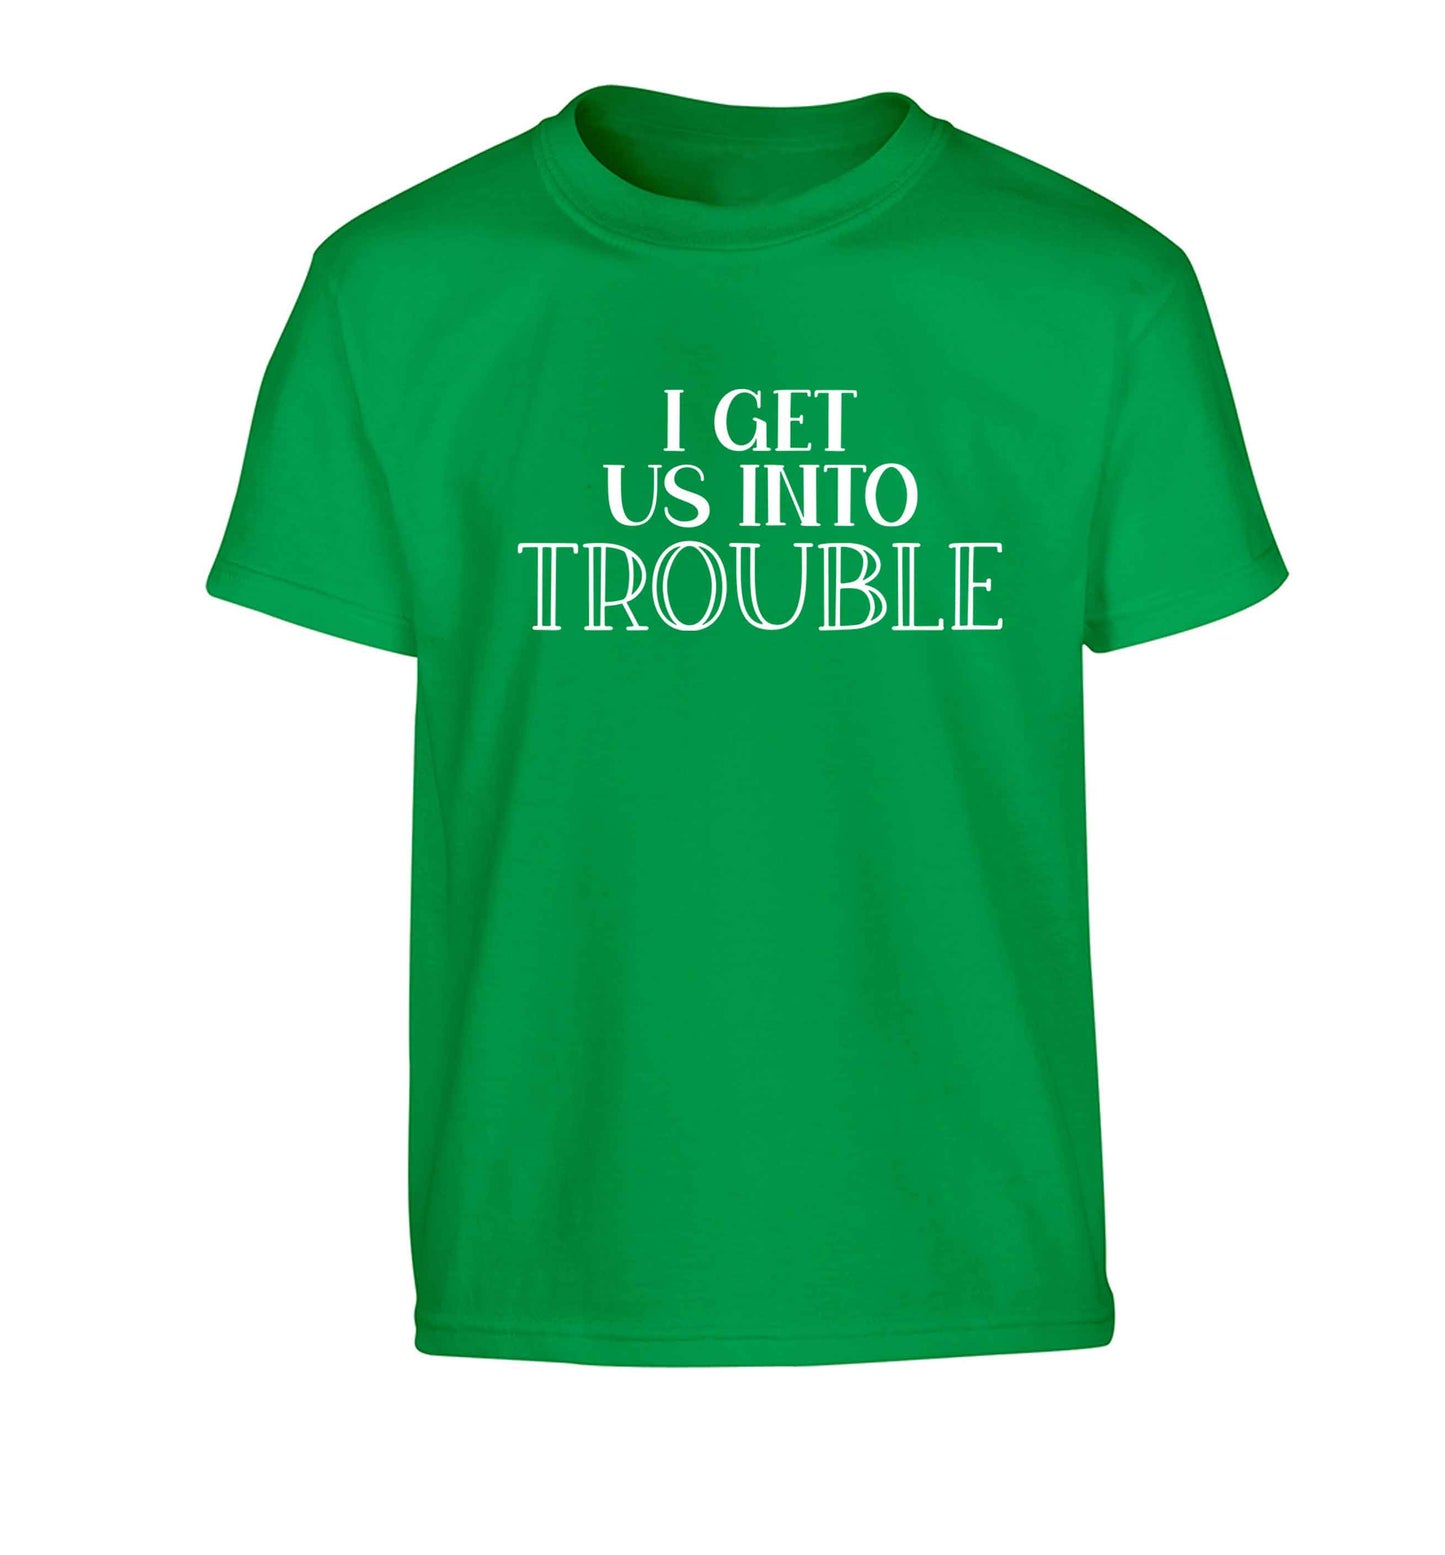 I get us into trouble Children's green Tshirt 12-13 Years